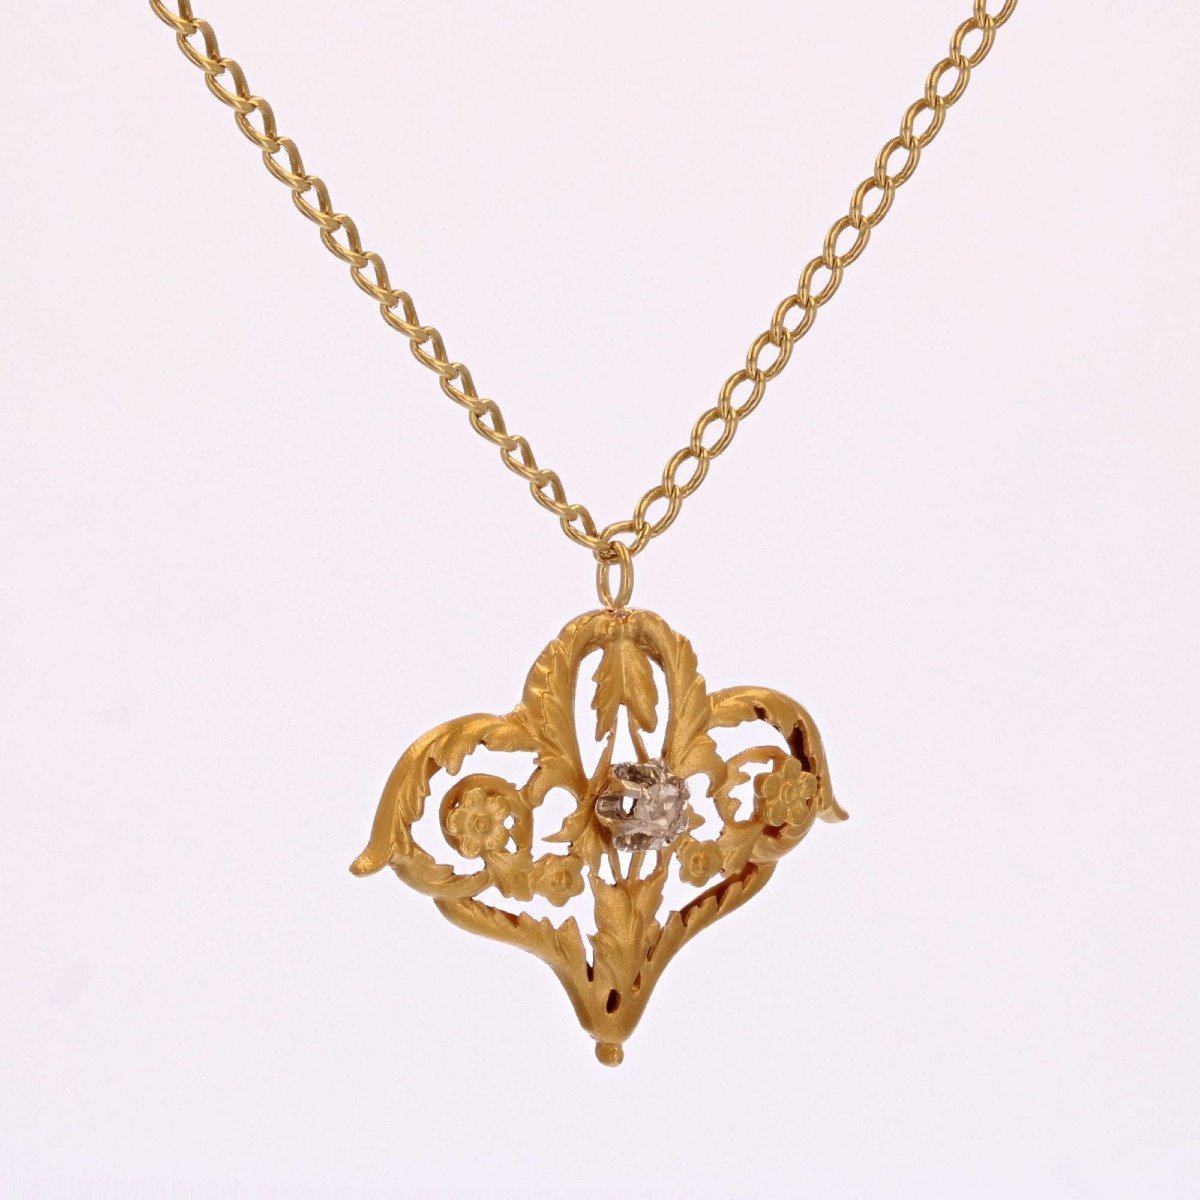 Old Chain And Its Arabesque And Rose-cut Diamond Pendant-photo-1